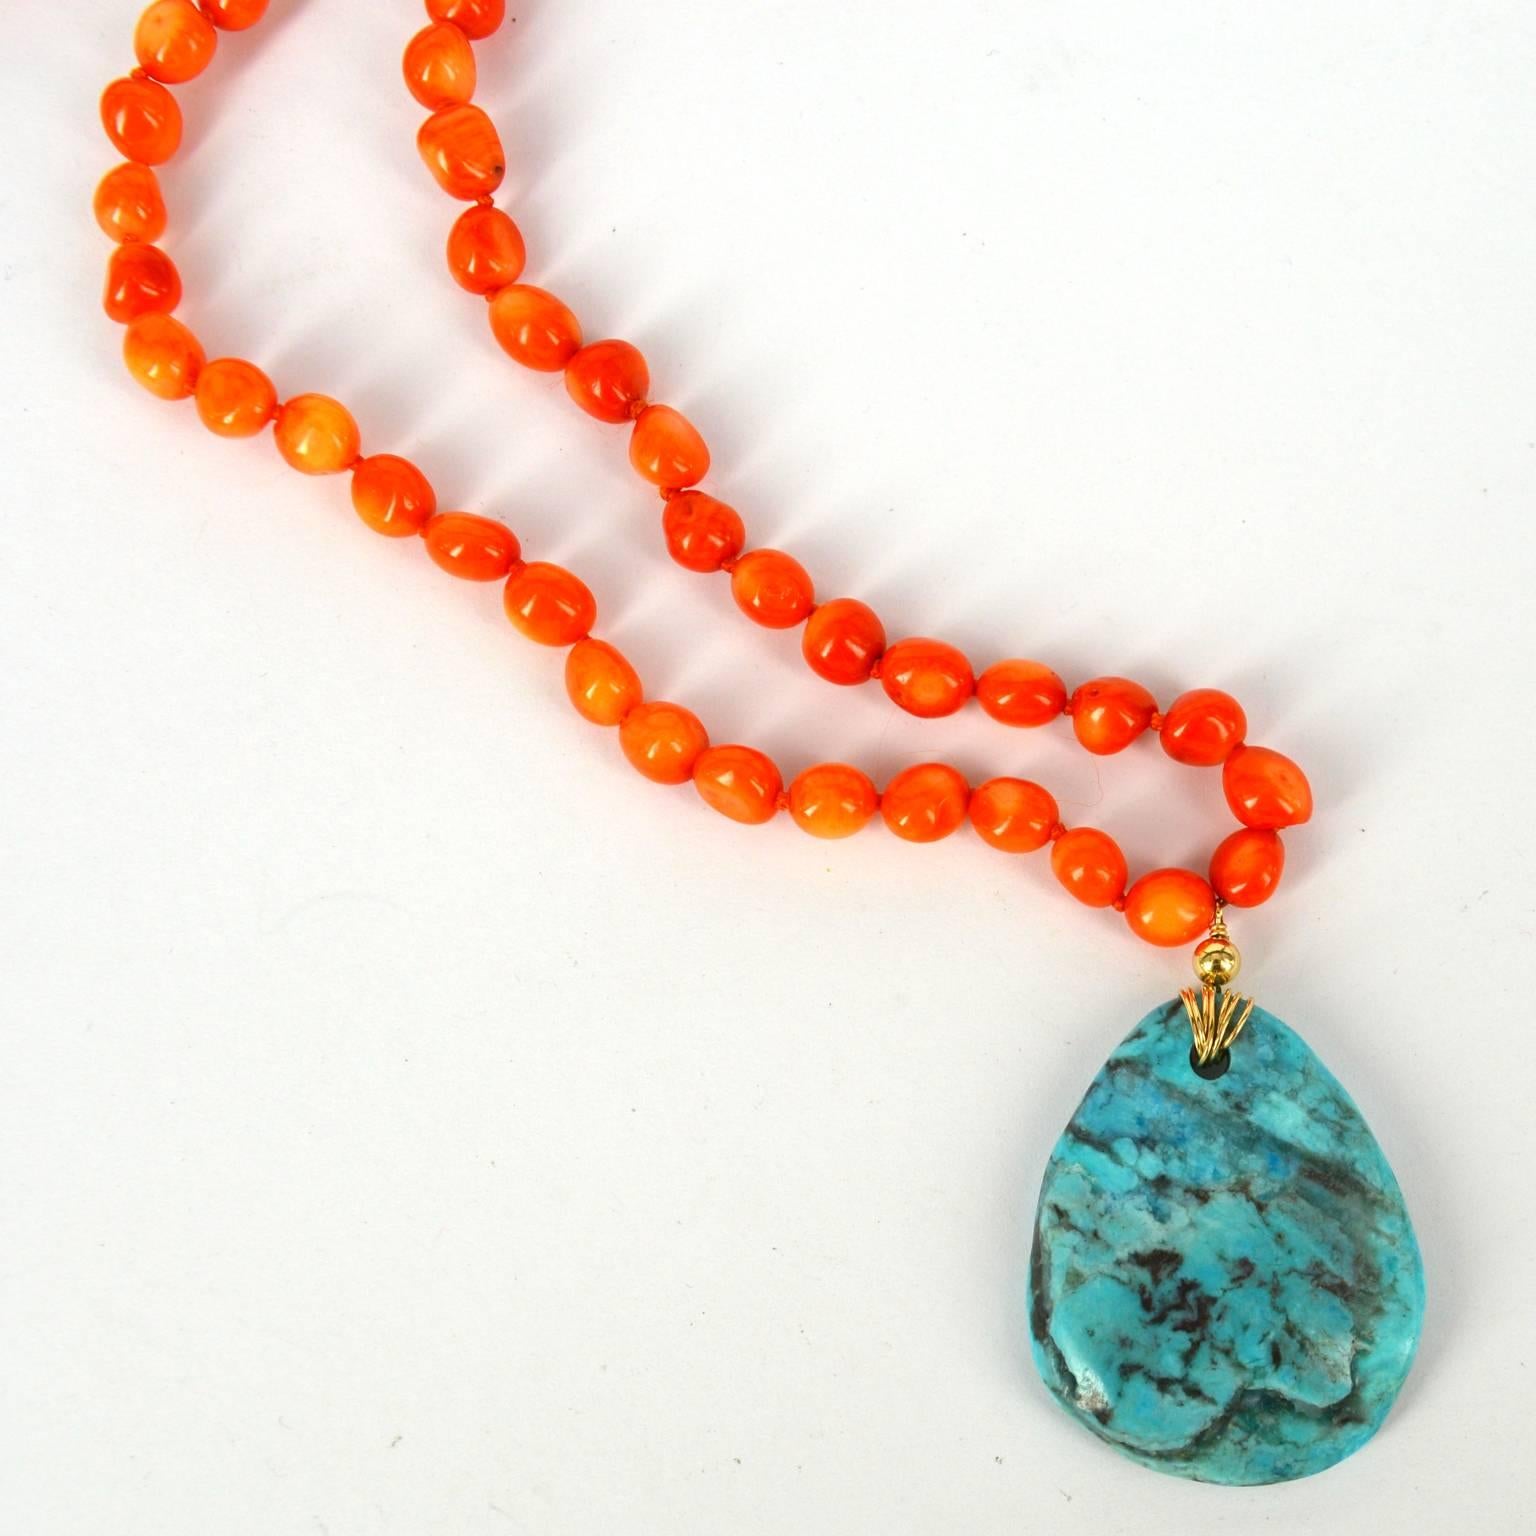 Long and versatile necklace can be worn long or wrapped twice around the neck. Orange Sea Bamboo Coral nuggets with a natural turquoise Pendant. Coral nuggets approx 8mm with a 40x30mm turquoise pendant, hand knotted with a 8mm 14k Gold filled